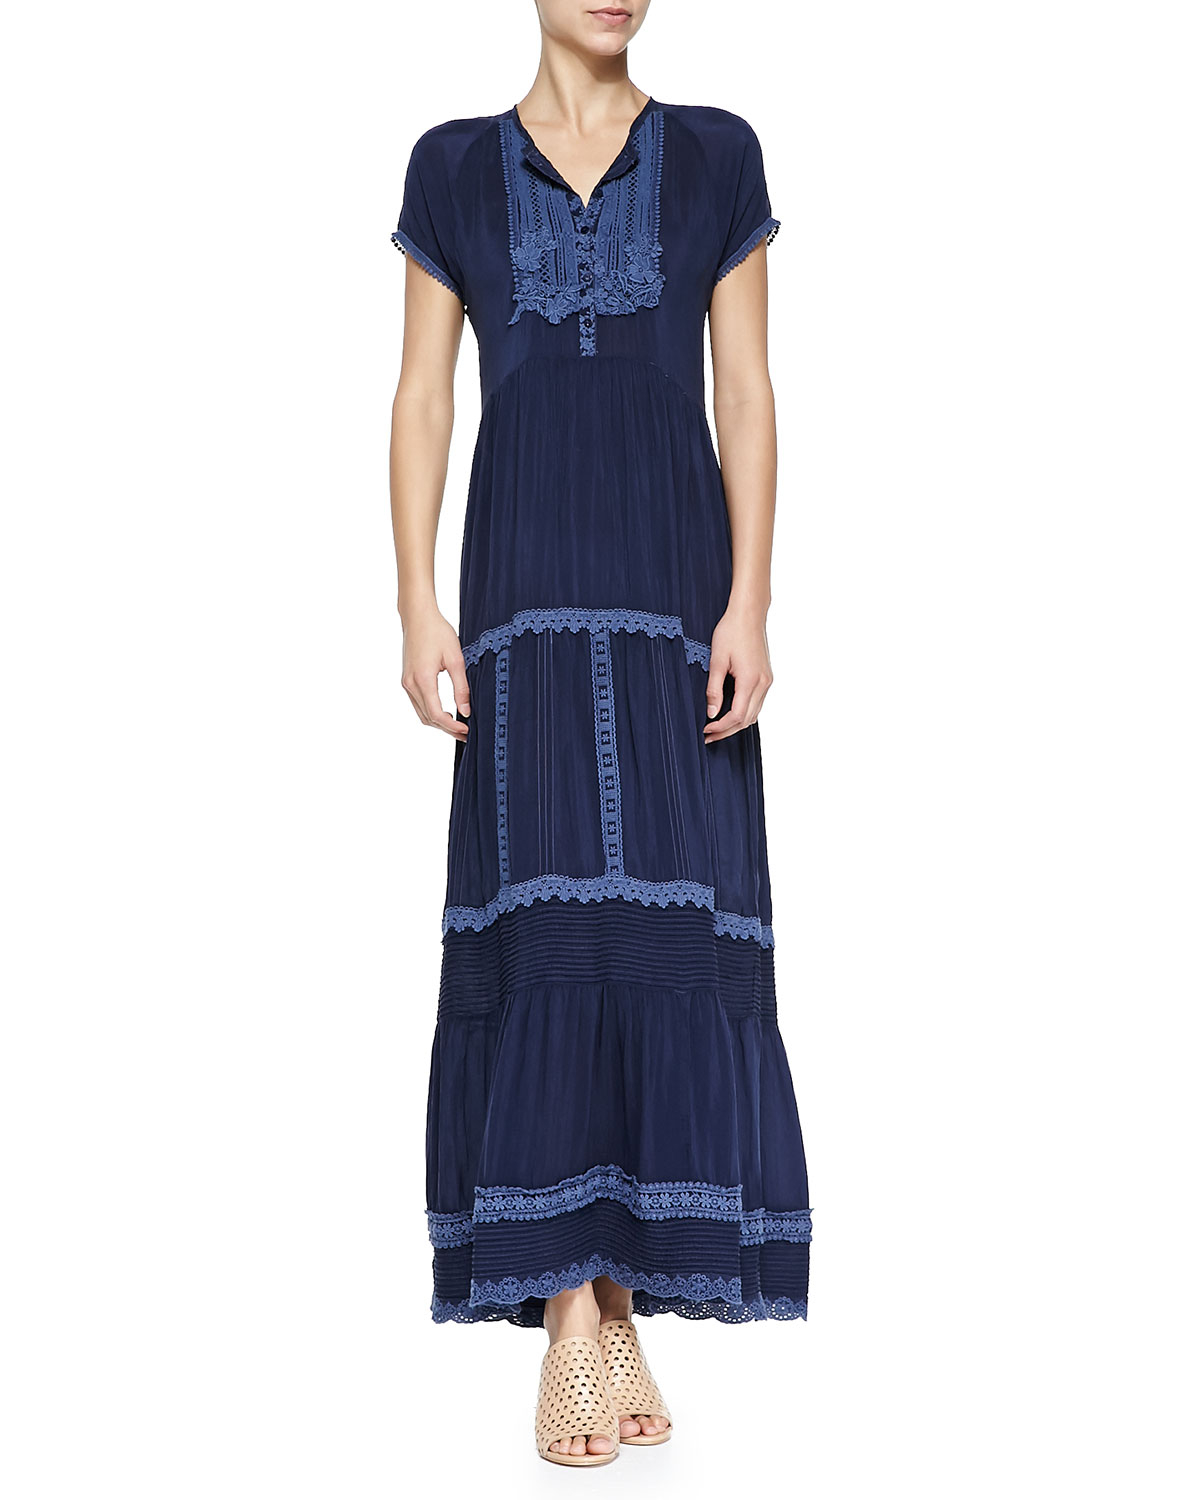 Lyst - Johnny Was Short-sleeve Maxi Dress in Blue